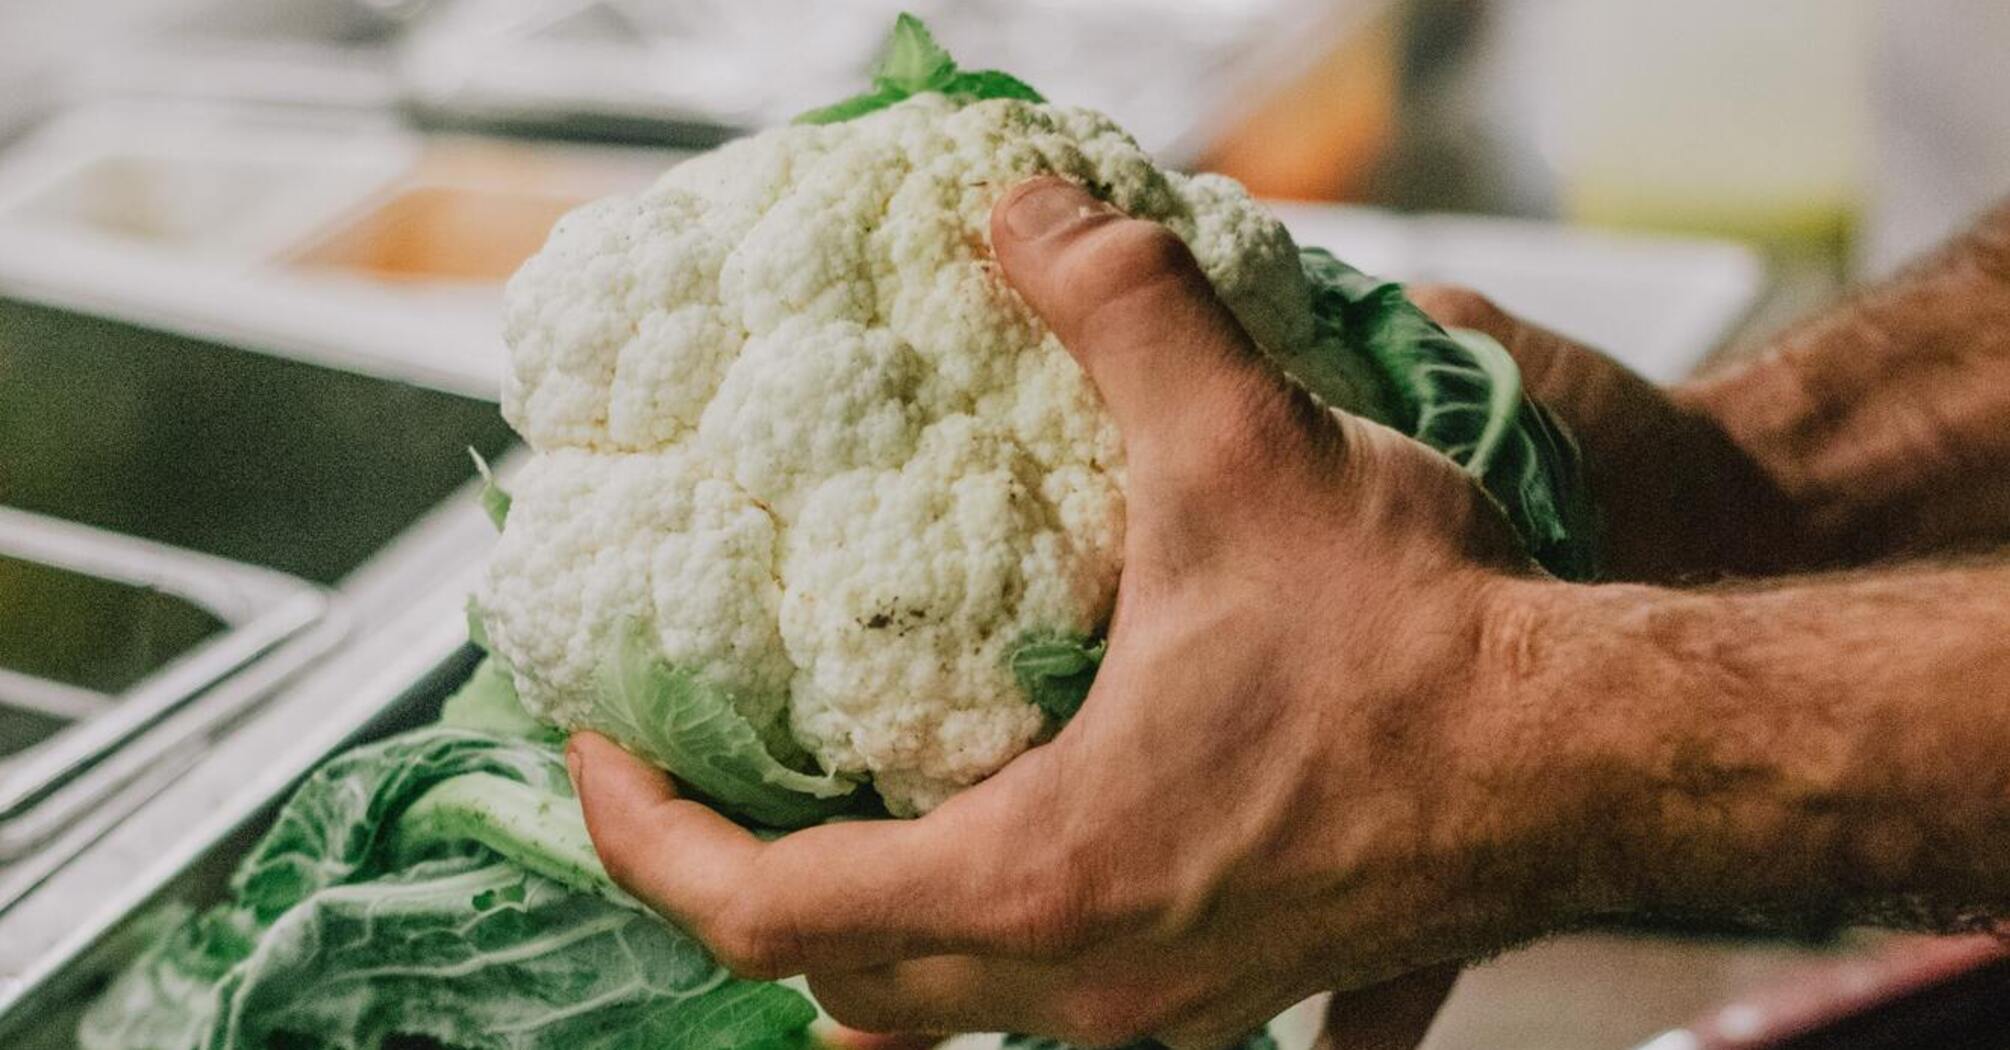 How to bake cauliflower deliciously